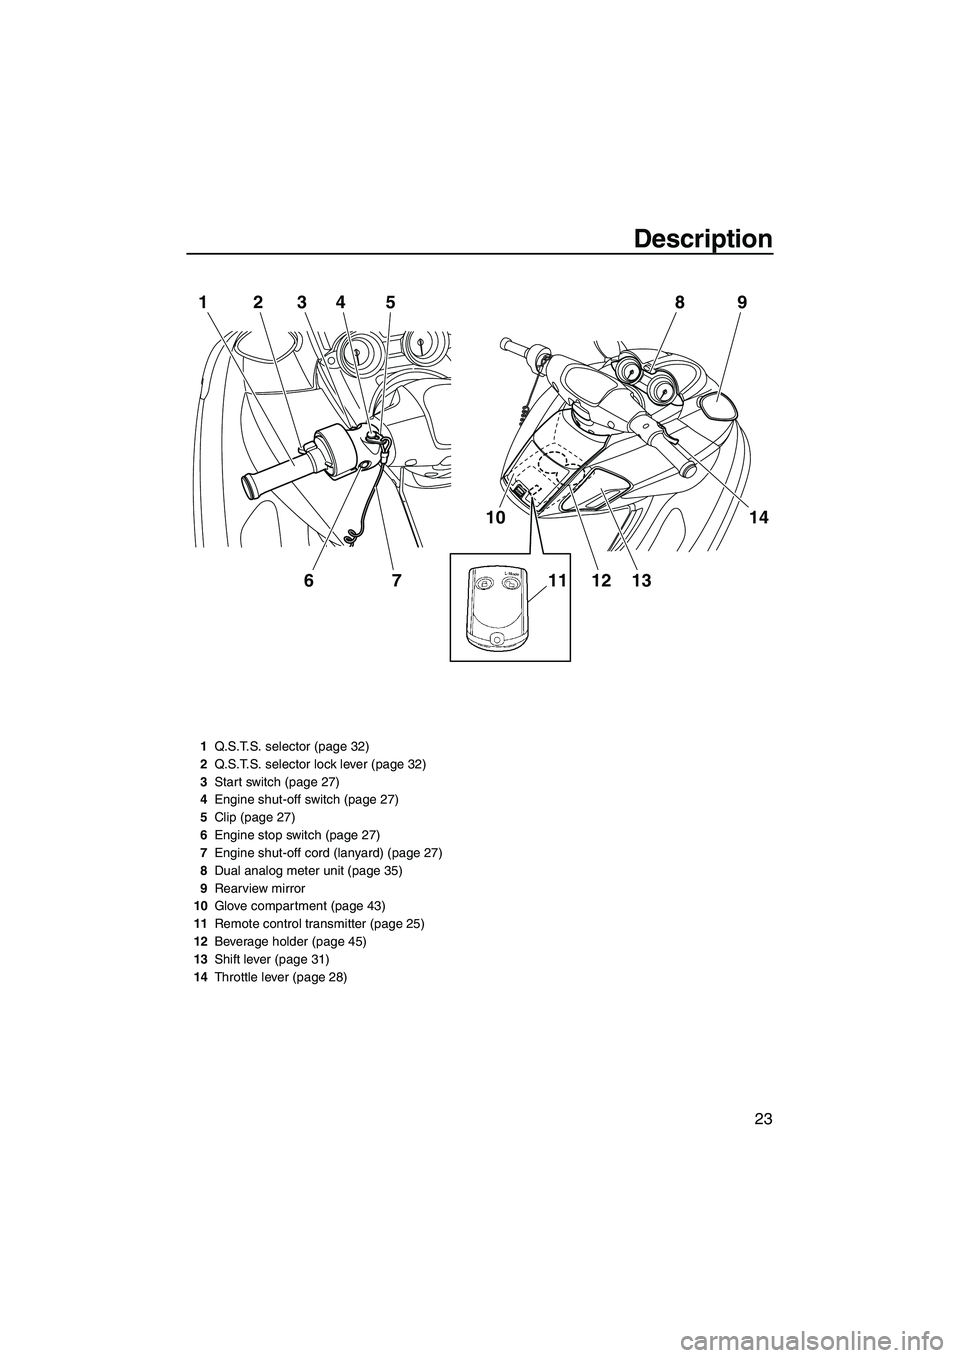 YAMAHA FZR 2012  Owners Manual Description
23
1234
675
10
1112 1314 9 8
1Q.S.T.S. selector (page 32)
2Q.S.T.S. selector lock lever (page 32)
3Start switch (page 27)
4Engine shut-off switch (page 27)
5Clip (page 27)
6Engine stop swi